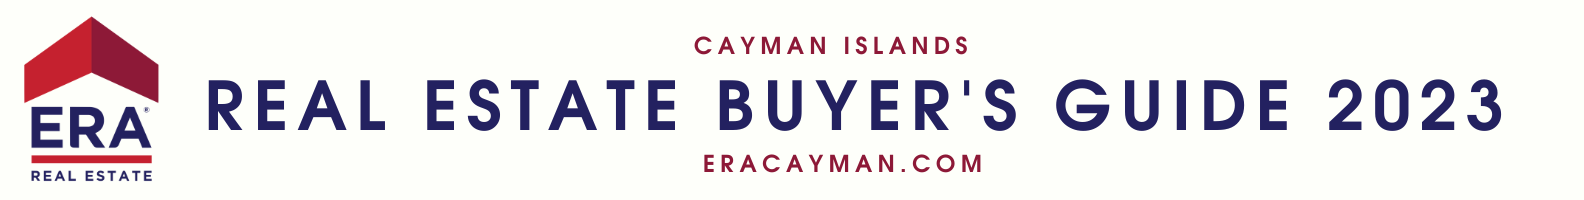 cayman real estate buyer’s guide